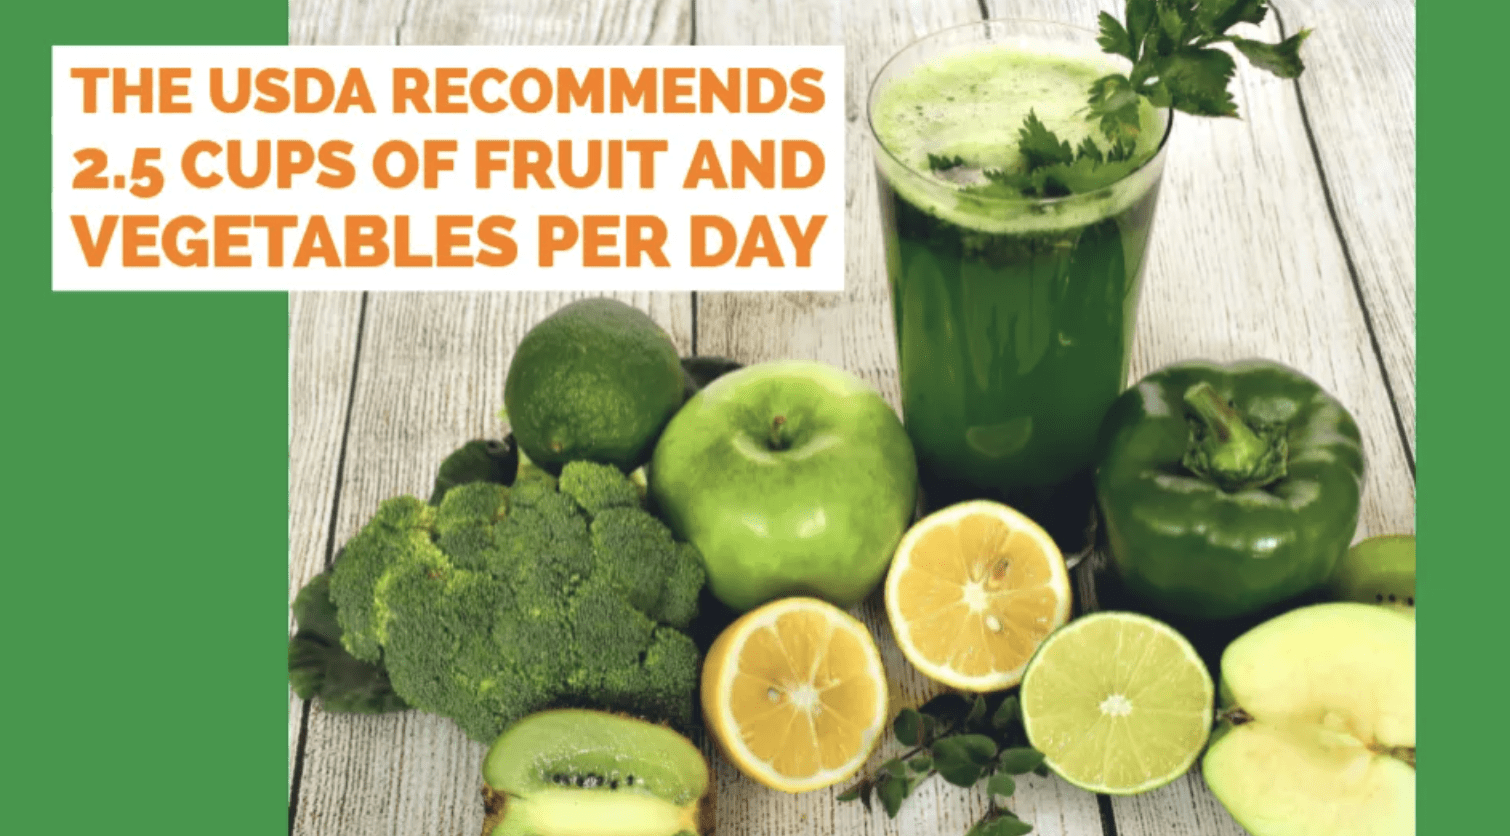 Commercial Fruit Juicer: Everything You Need to Know